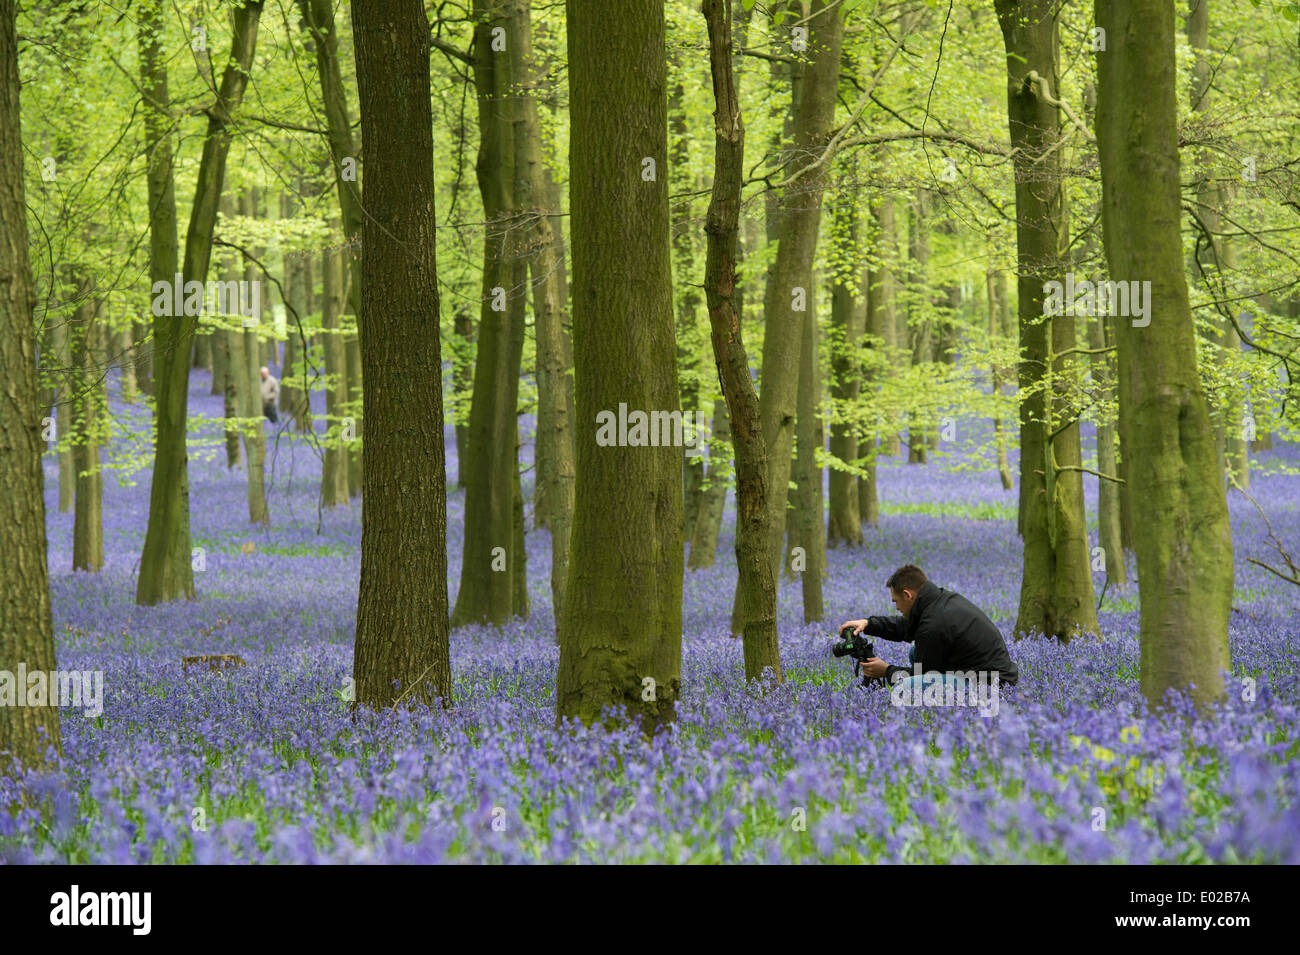 Male Photographer photographing bluebells in an English wood Stock Photo